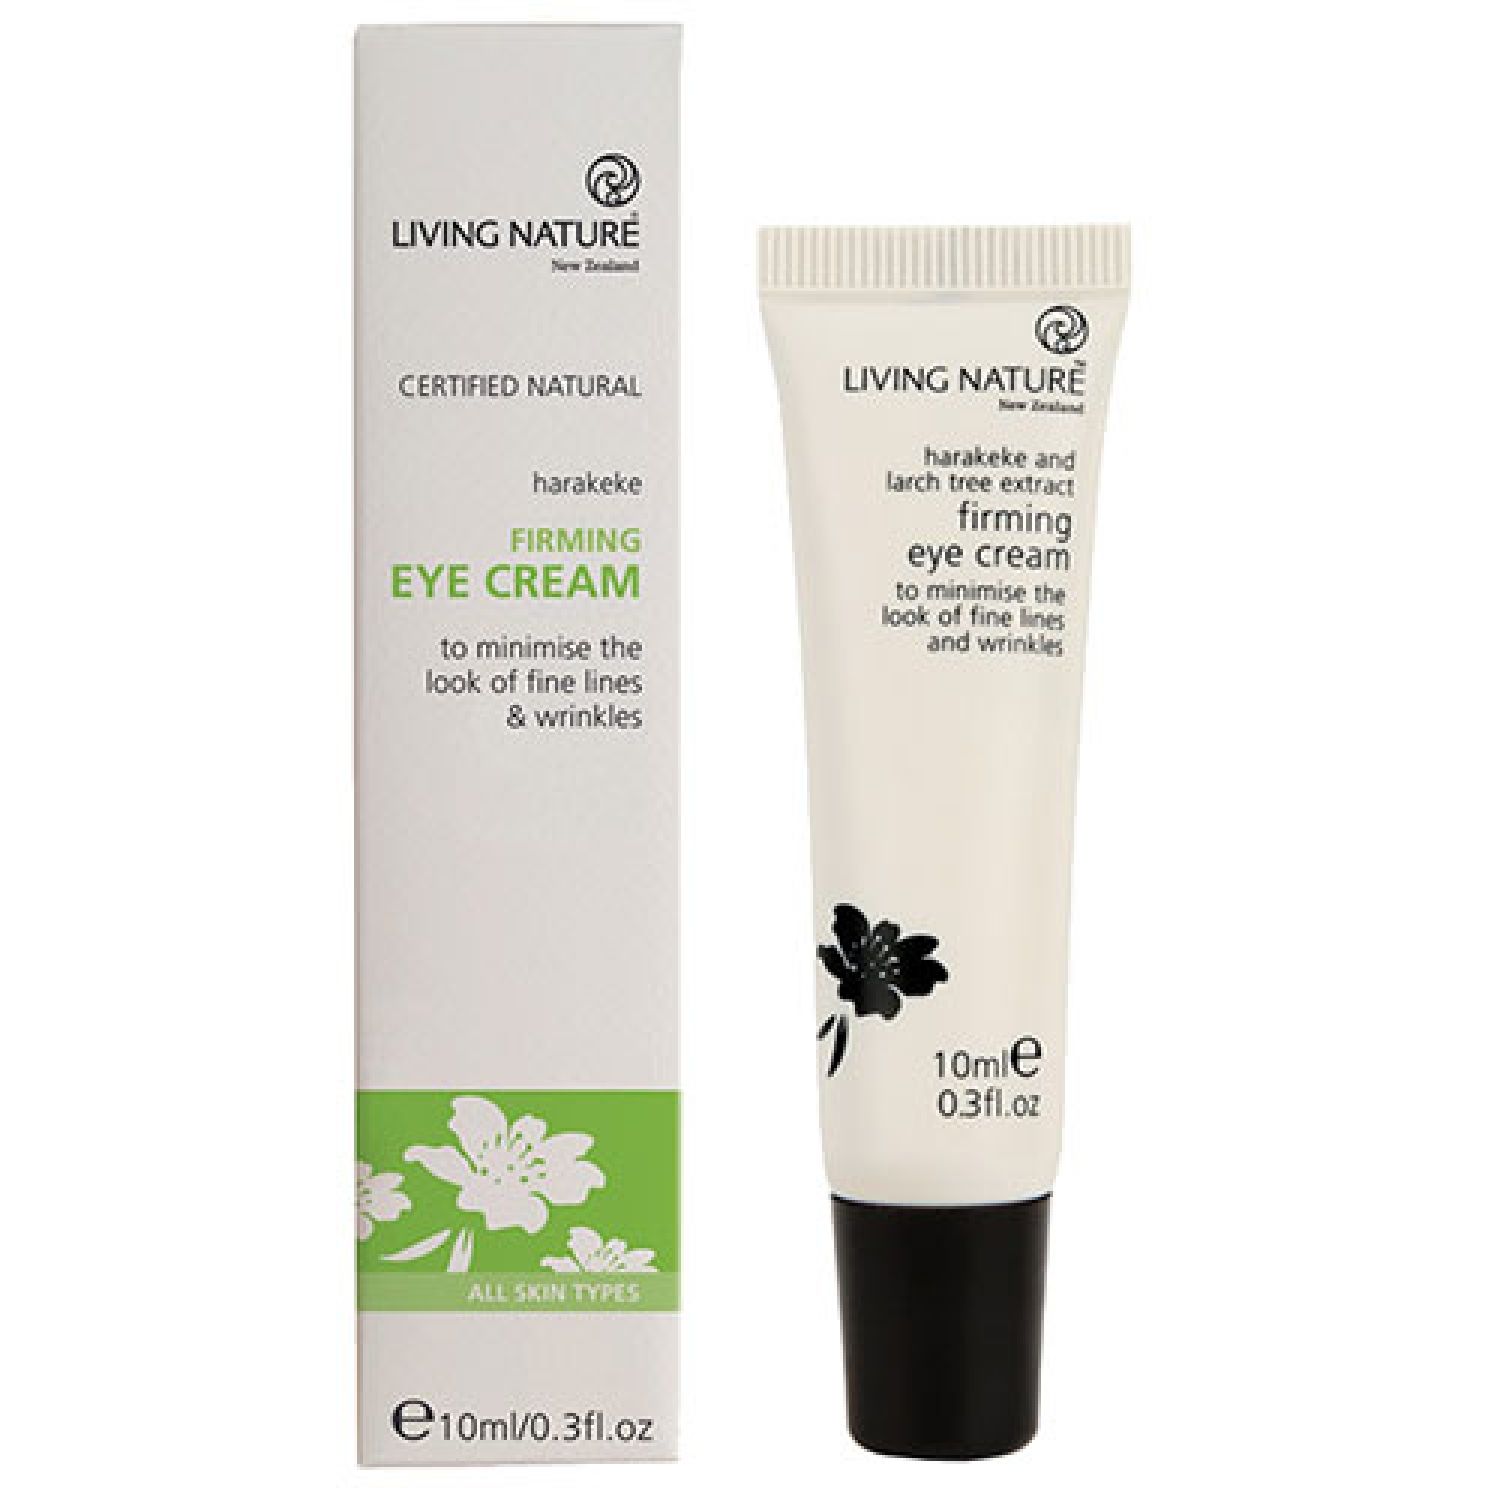 Living Nature certified natural Firming Eye Cream